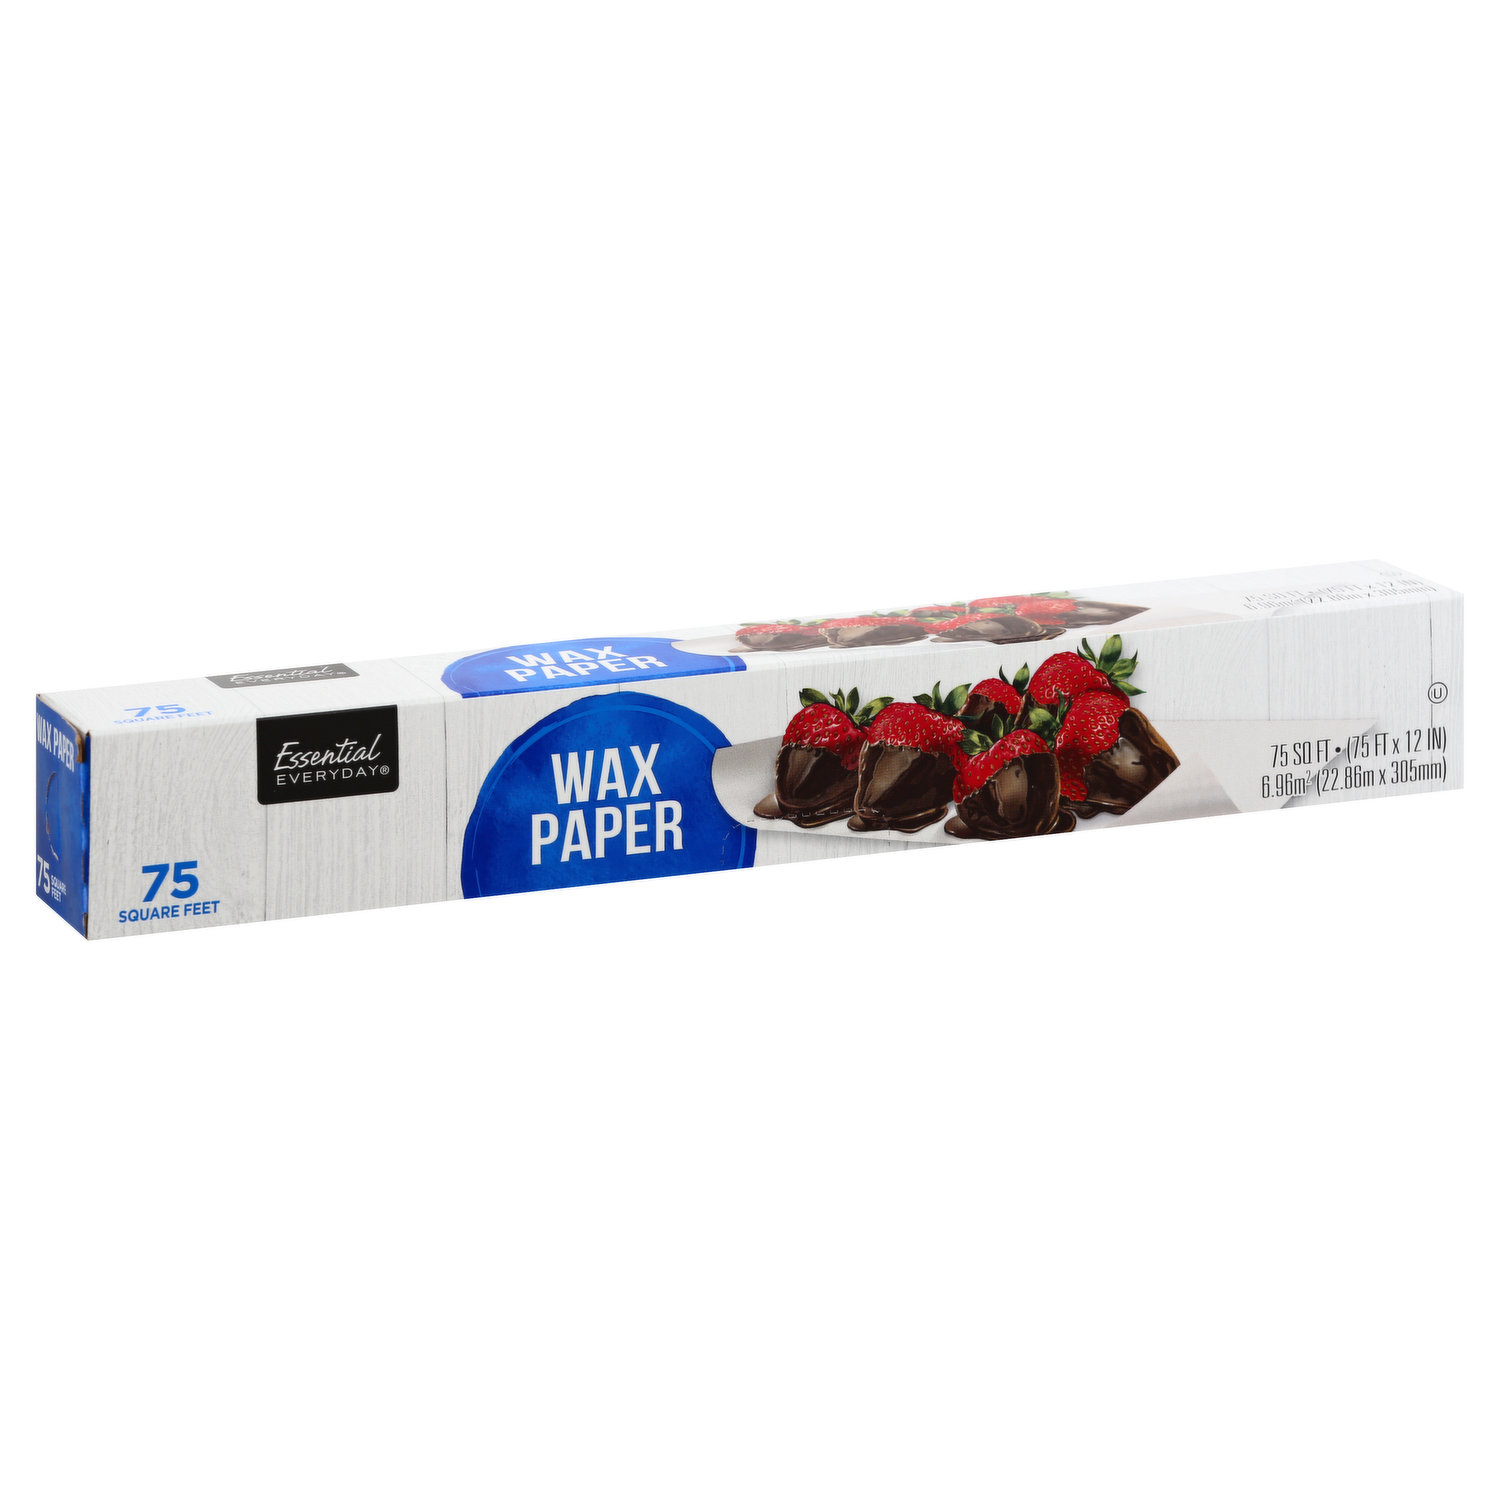 Lowest Price: Reynolds Kitchens Cut-Rite Wax Paper, 75 Square Foot  Roll